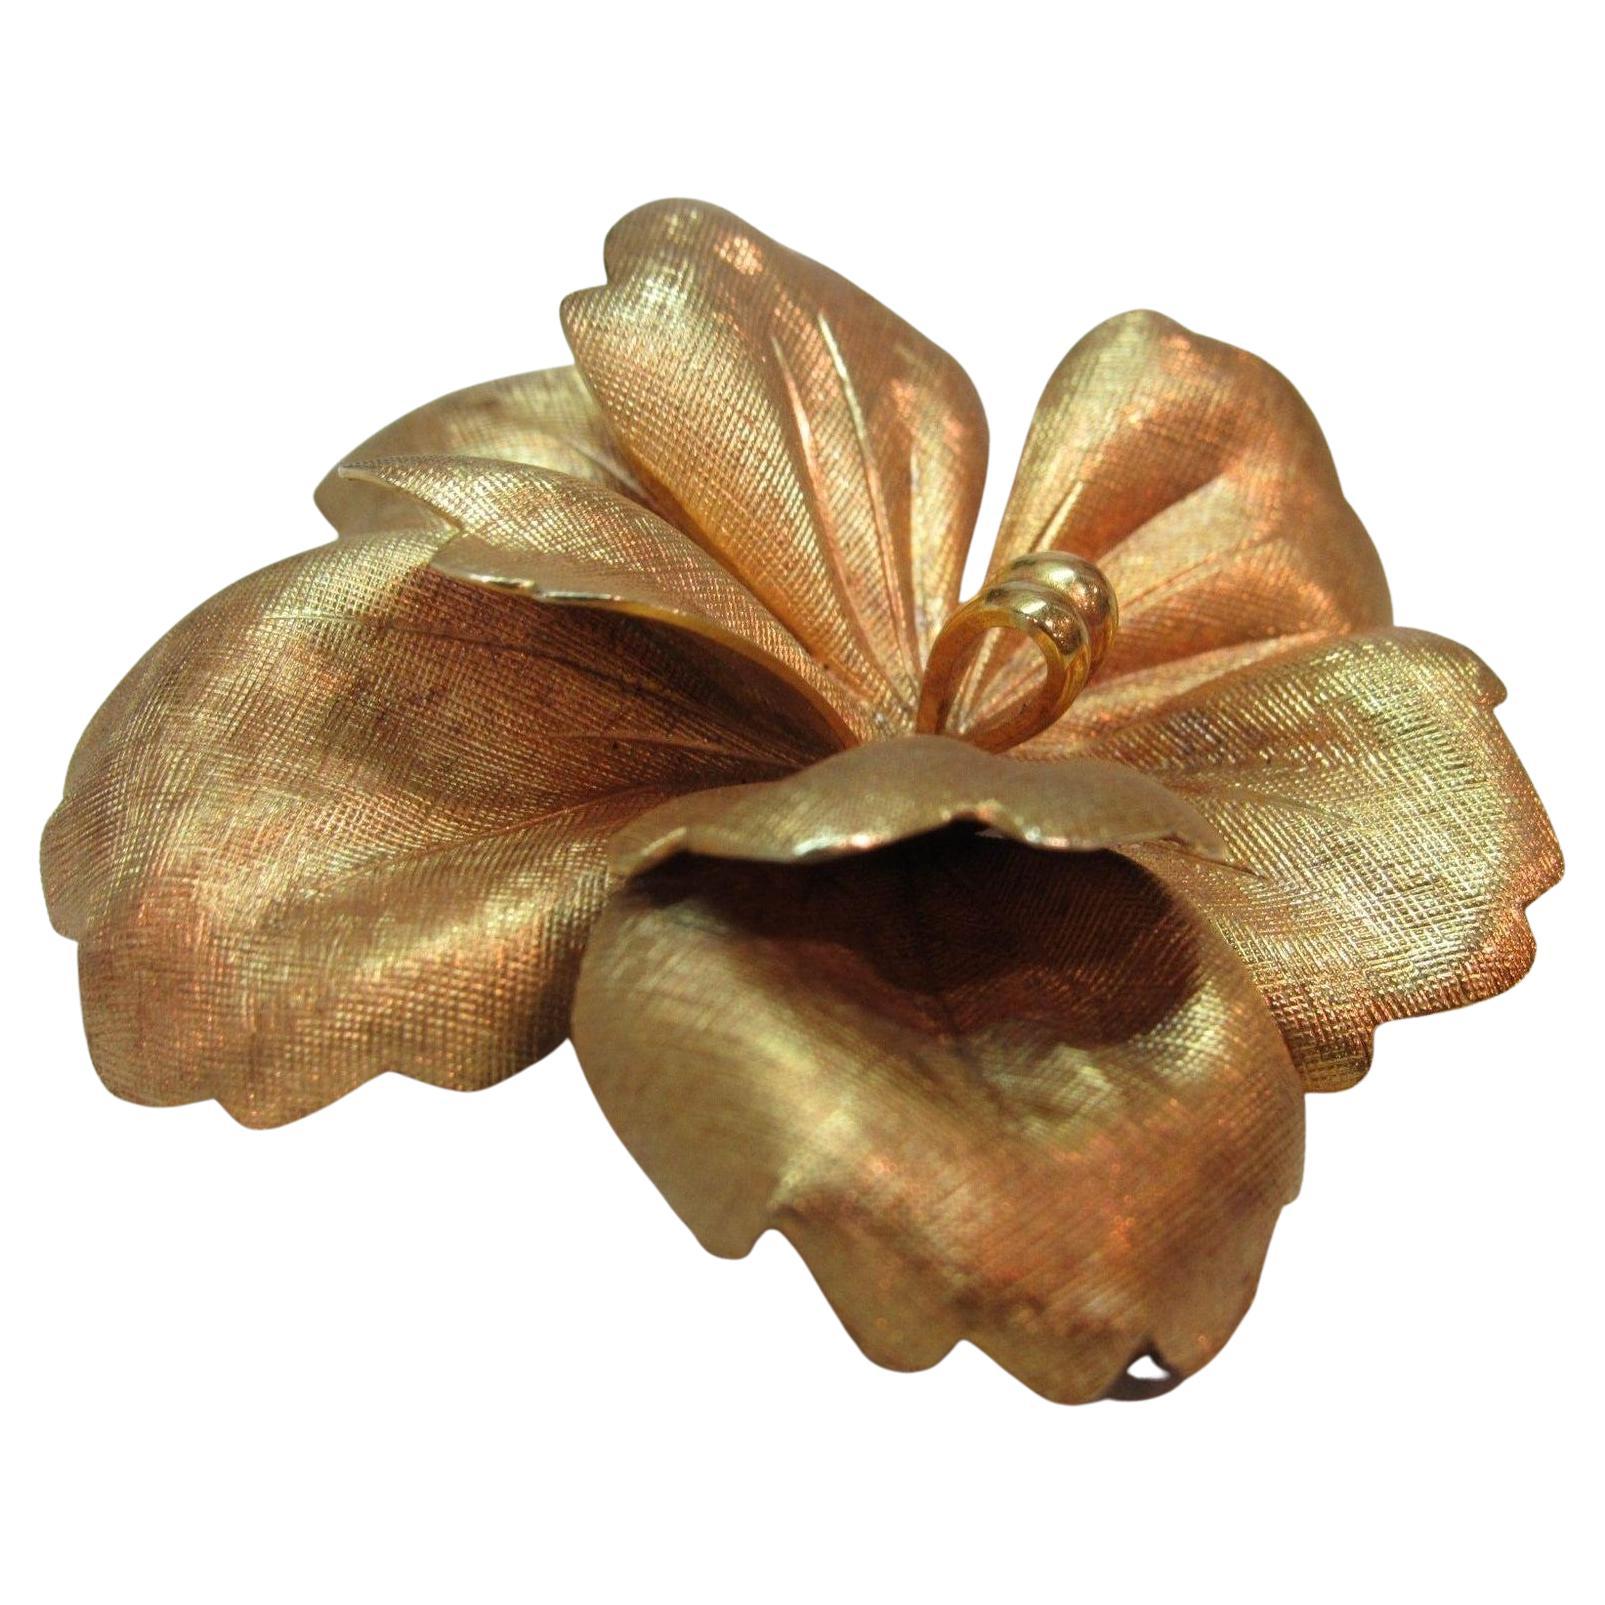 Lovely Tiffany & Co. large Orchid brooch in 14K yellow gold. The petals are finely detailed and dimensional - just gorgeous. This is a classic & timeless piece perfect for day or night.

Lovely Tiffany & Co. large orchid brooch in 14K yellow gold.